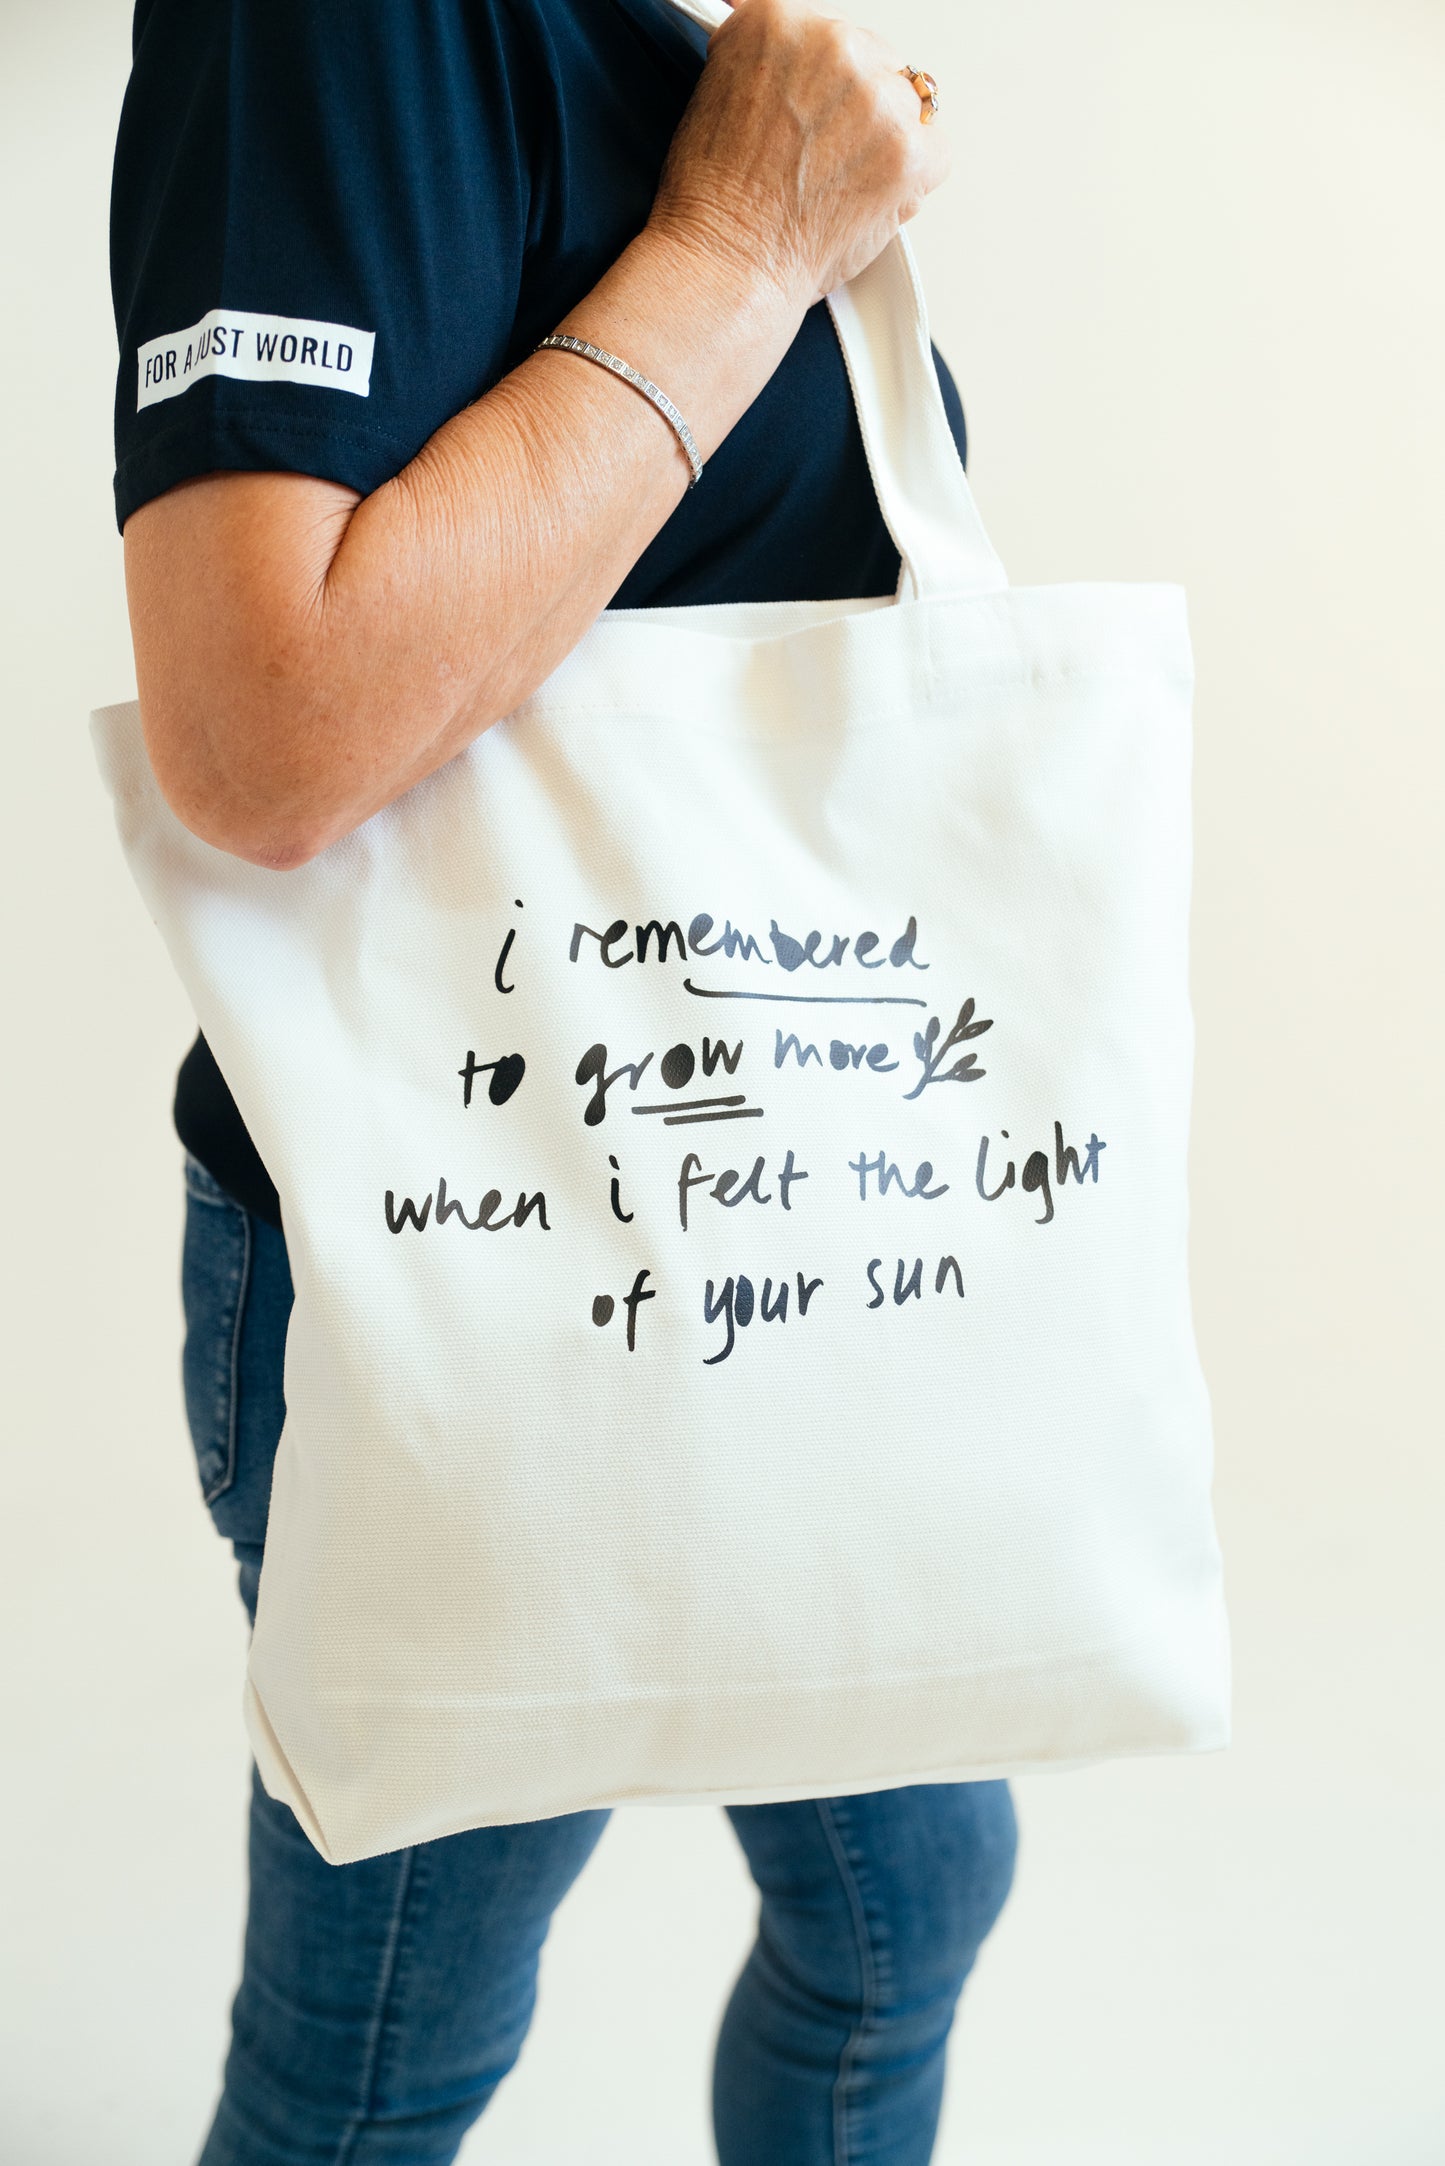 Kav Temperley tote Woman holding cream tote bag with words 'I remembered to grow more when I felt the light of your sun' in ink navy.